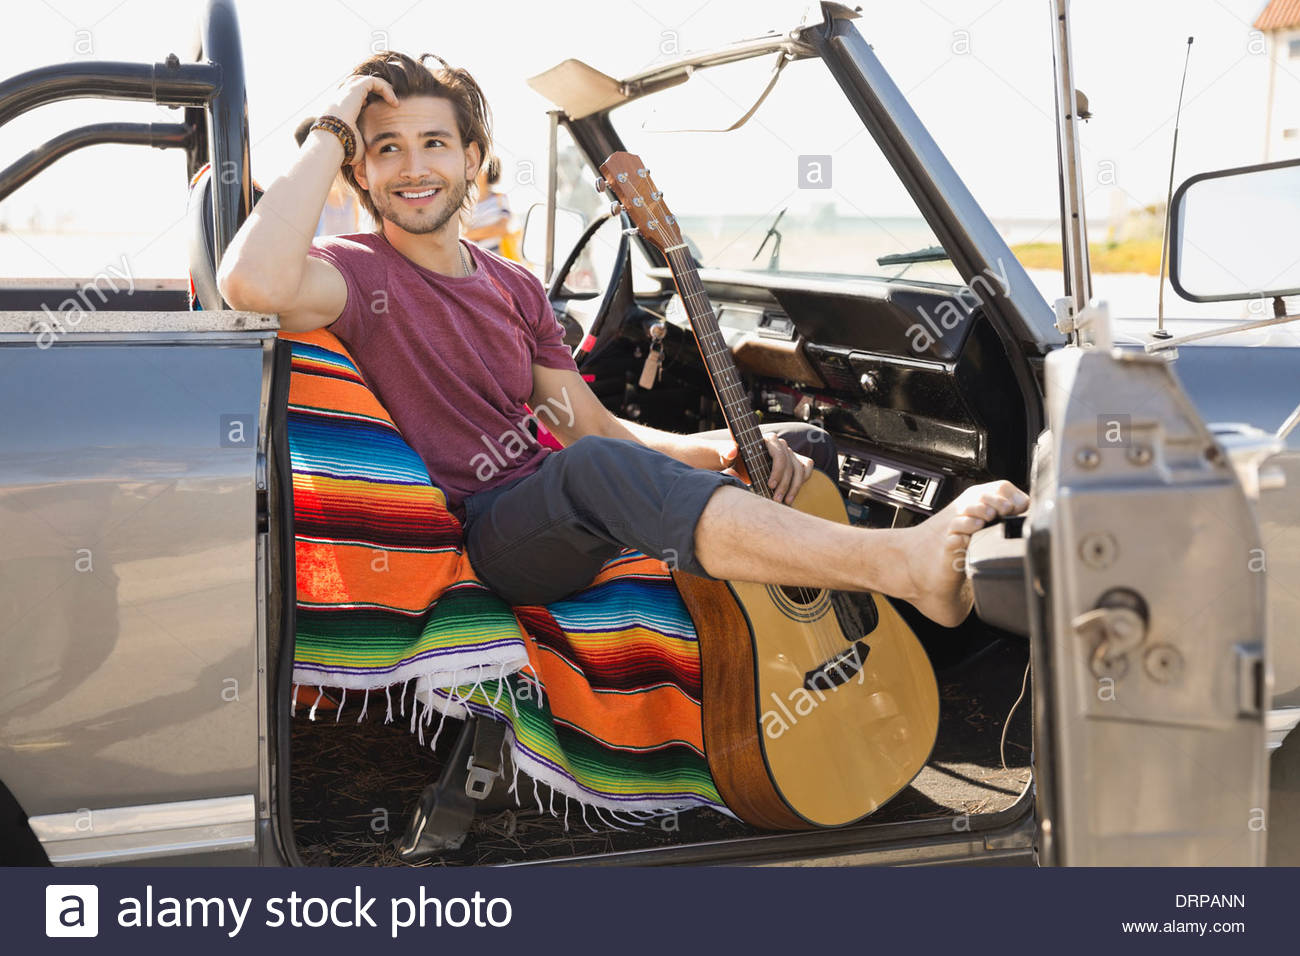 Man with guitar sitting in off-road vehicle Stock Photo